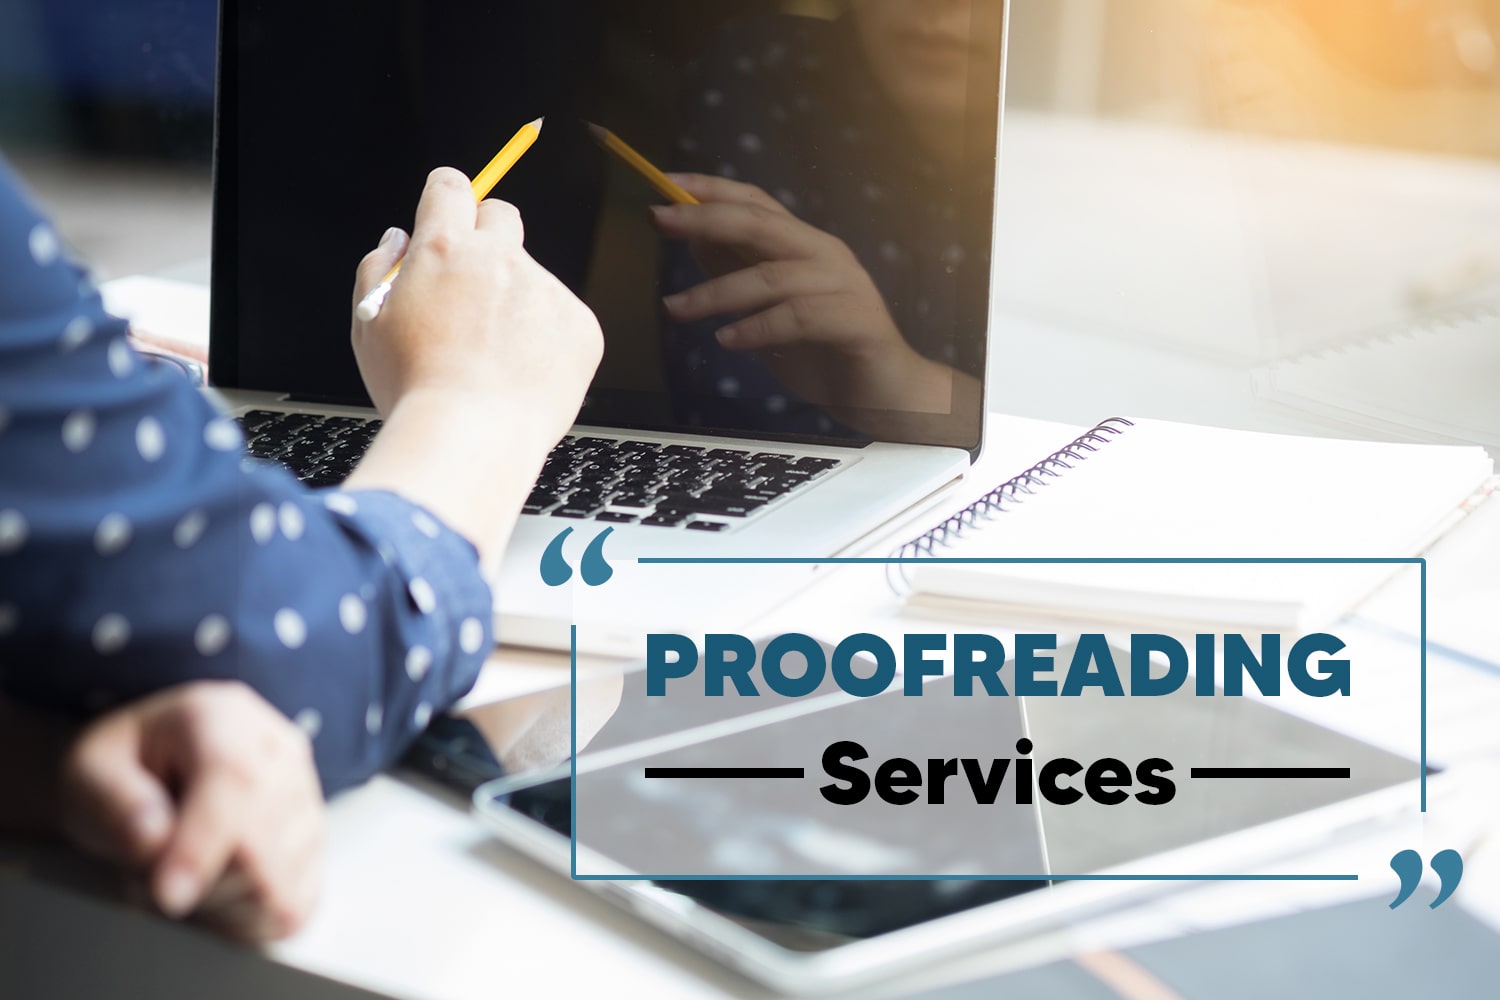 Best Resource For People Looking For Proofreading Services